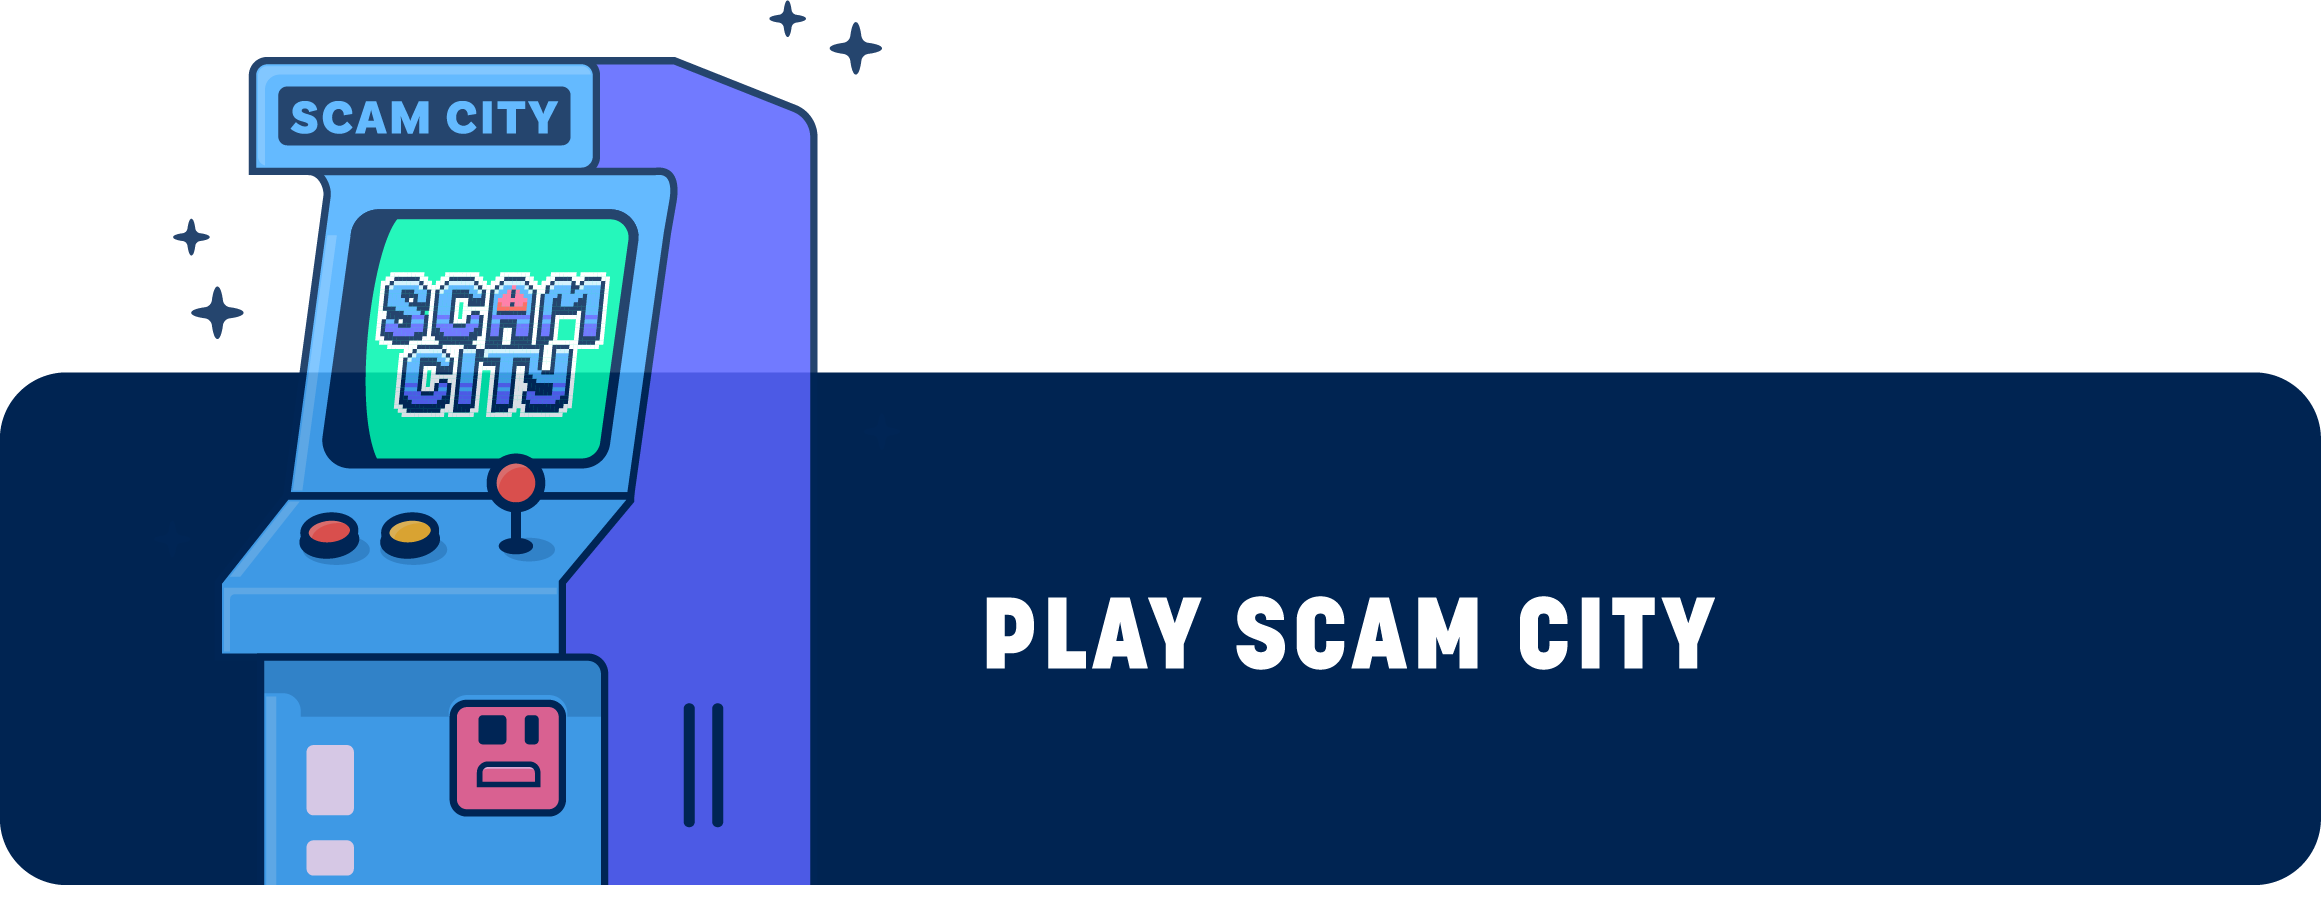 Click to Play Scam City